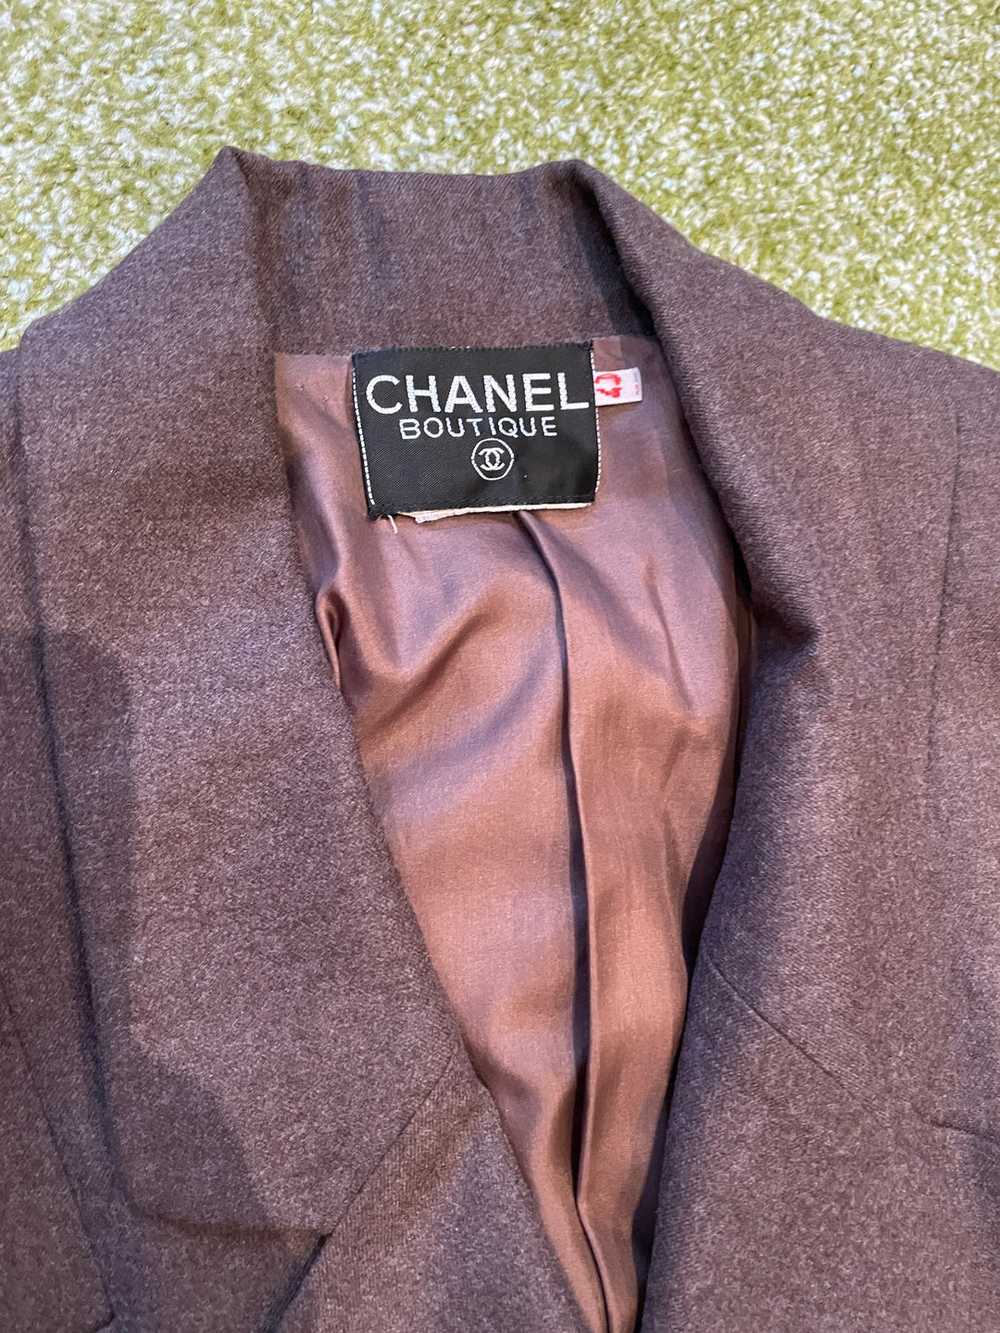 Chanel Brown Wool Suit (Size 8) - image 4